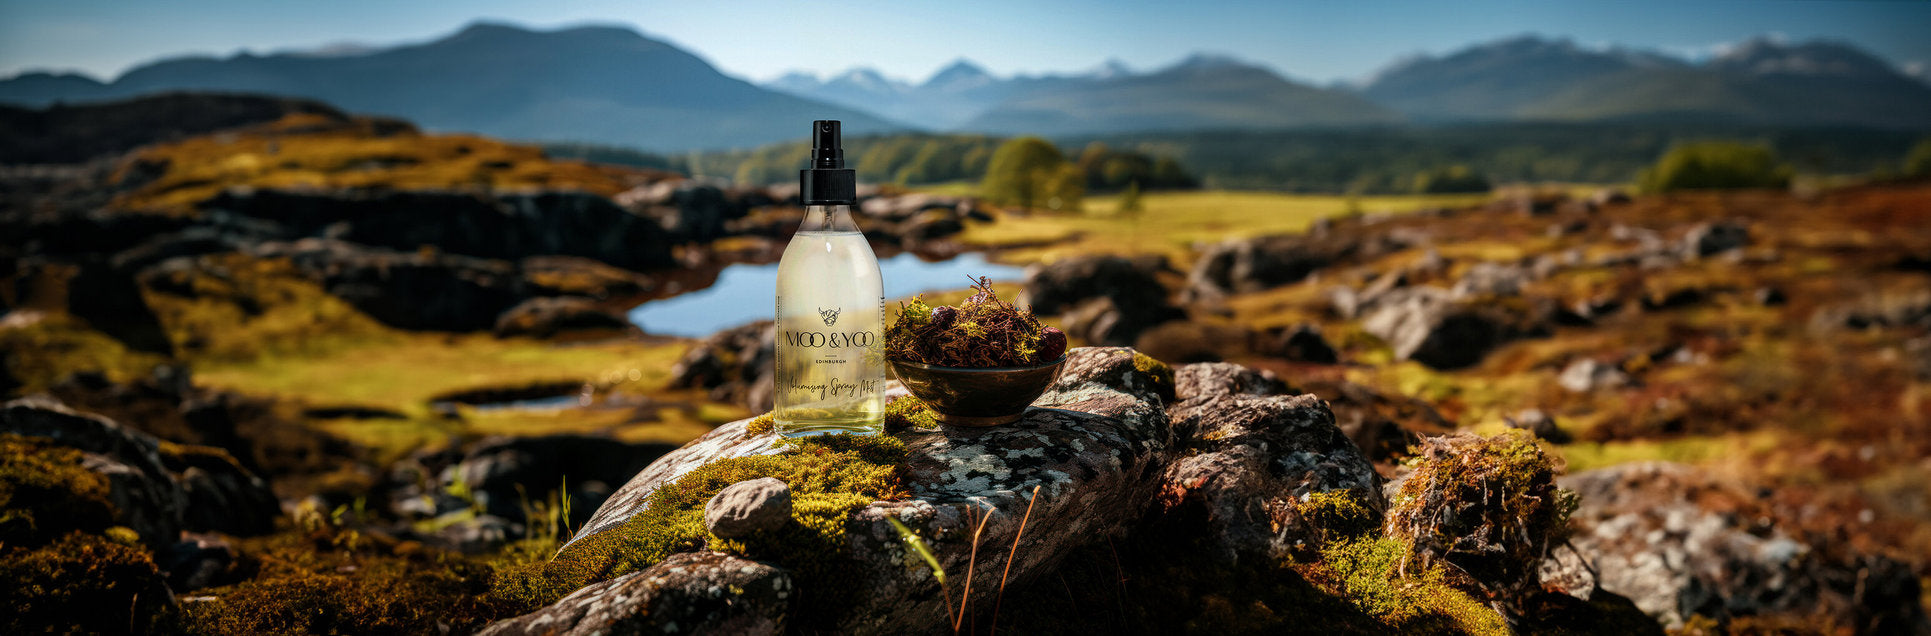 A bottle of Moo & Yoo Volumising Spray Mist sitting on a large rock which is covered in moss. The camera is focused on the bottle and there is a bowl full of moss sitting on the right of the bottle. There is a mountainous background with lots of greenery.